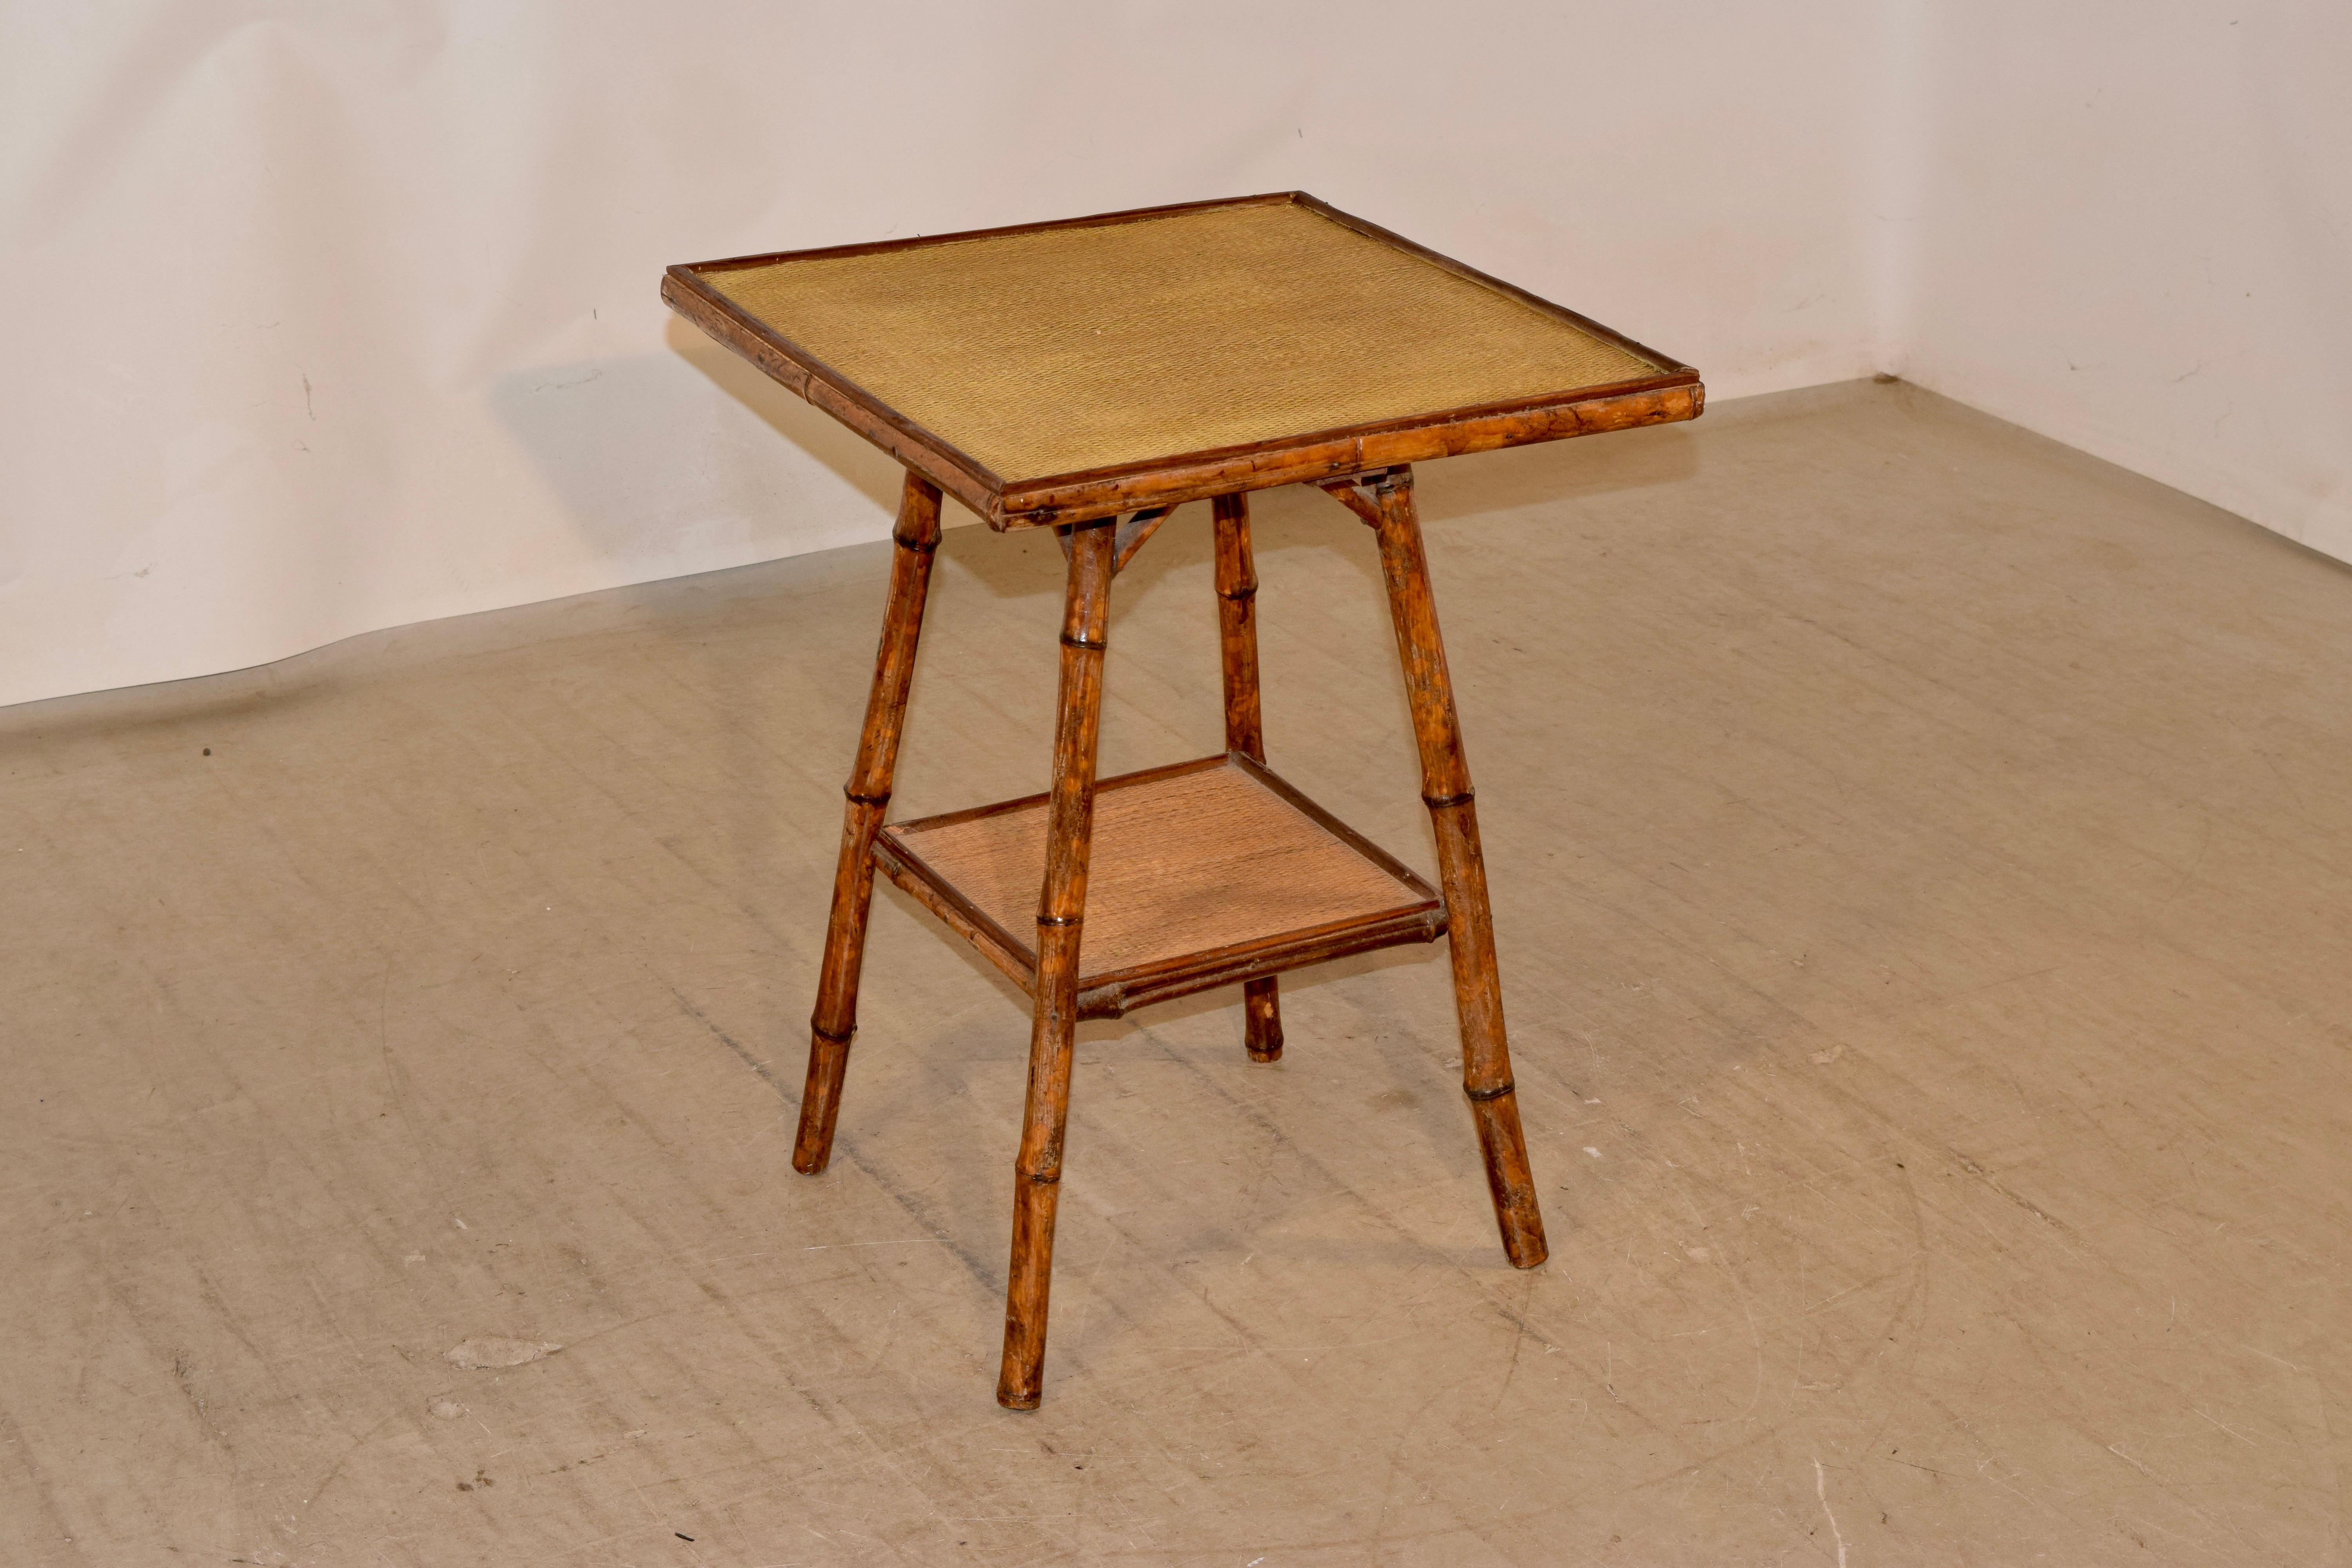 19th century tortoise bamboo side table from France. The table is supported on splayed legs, joined by a lower shelf, which is covered in rush, along with the top.